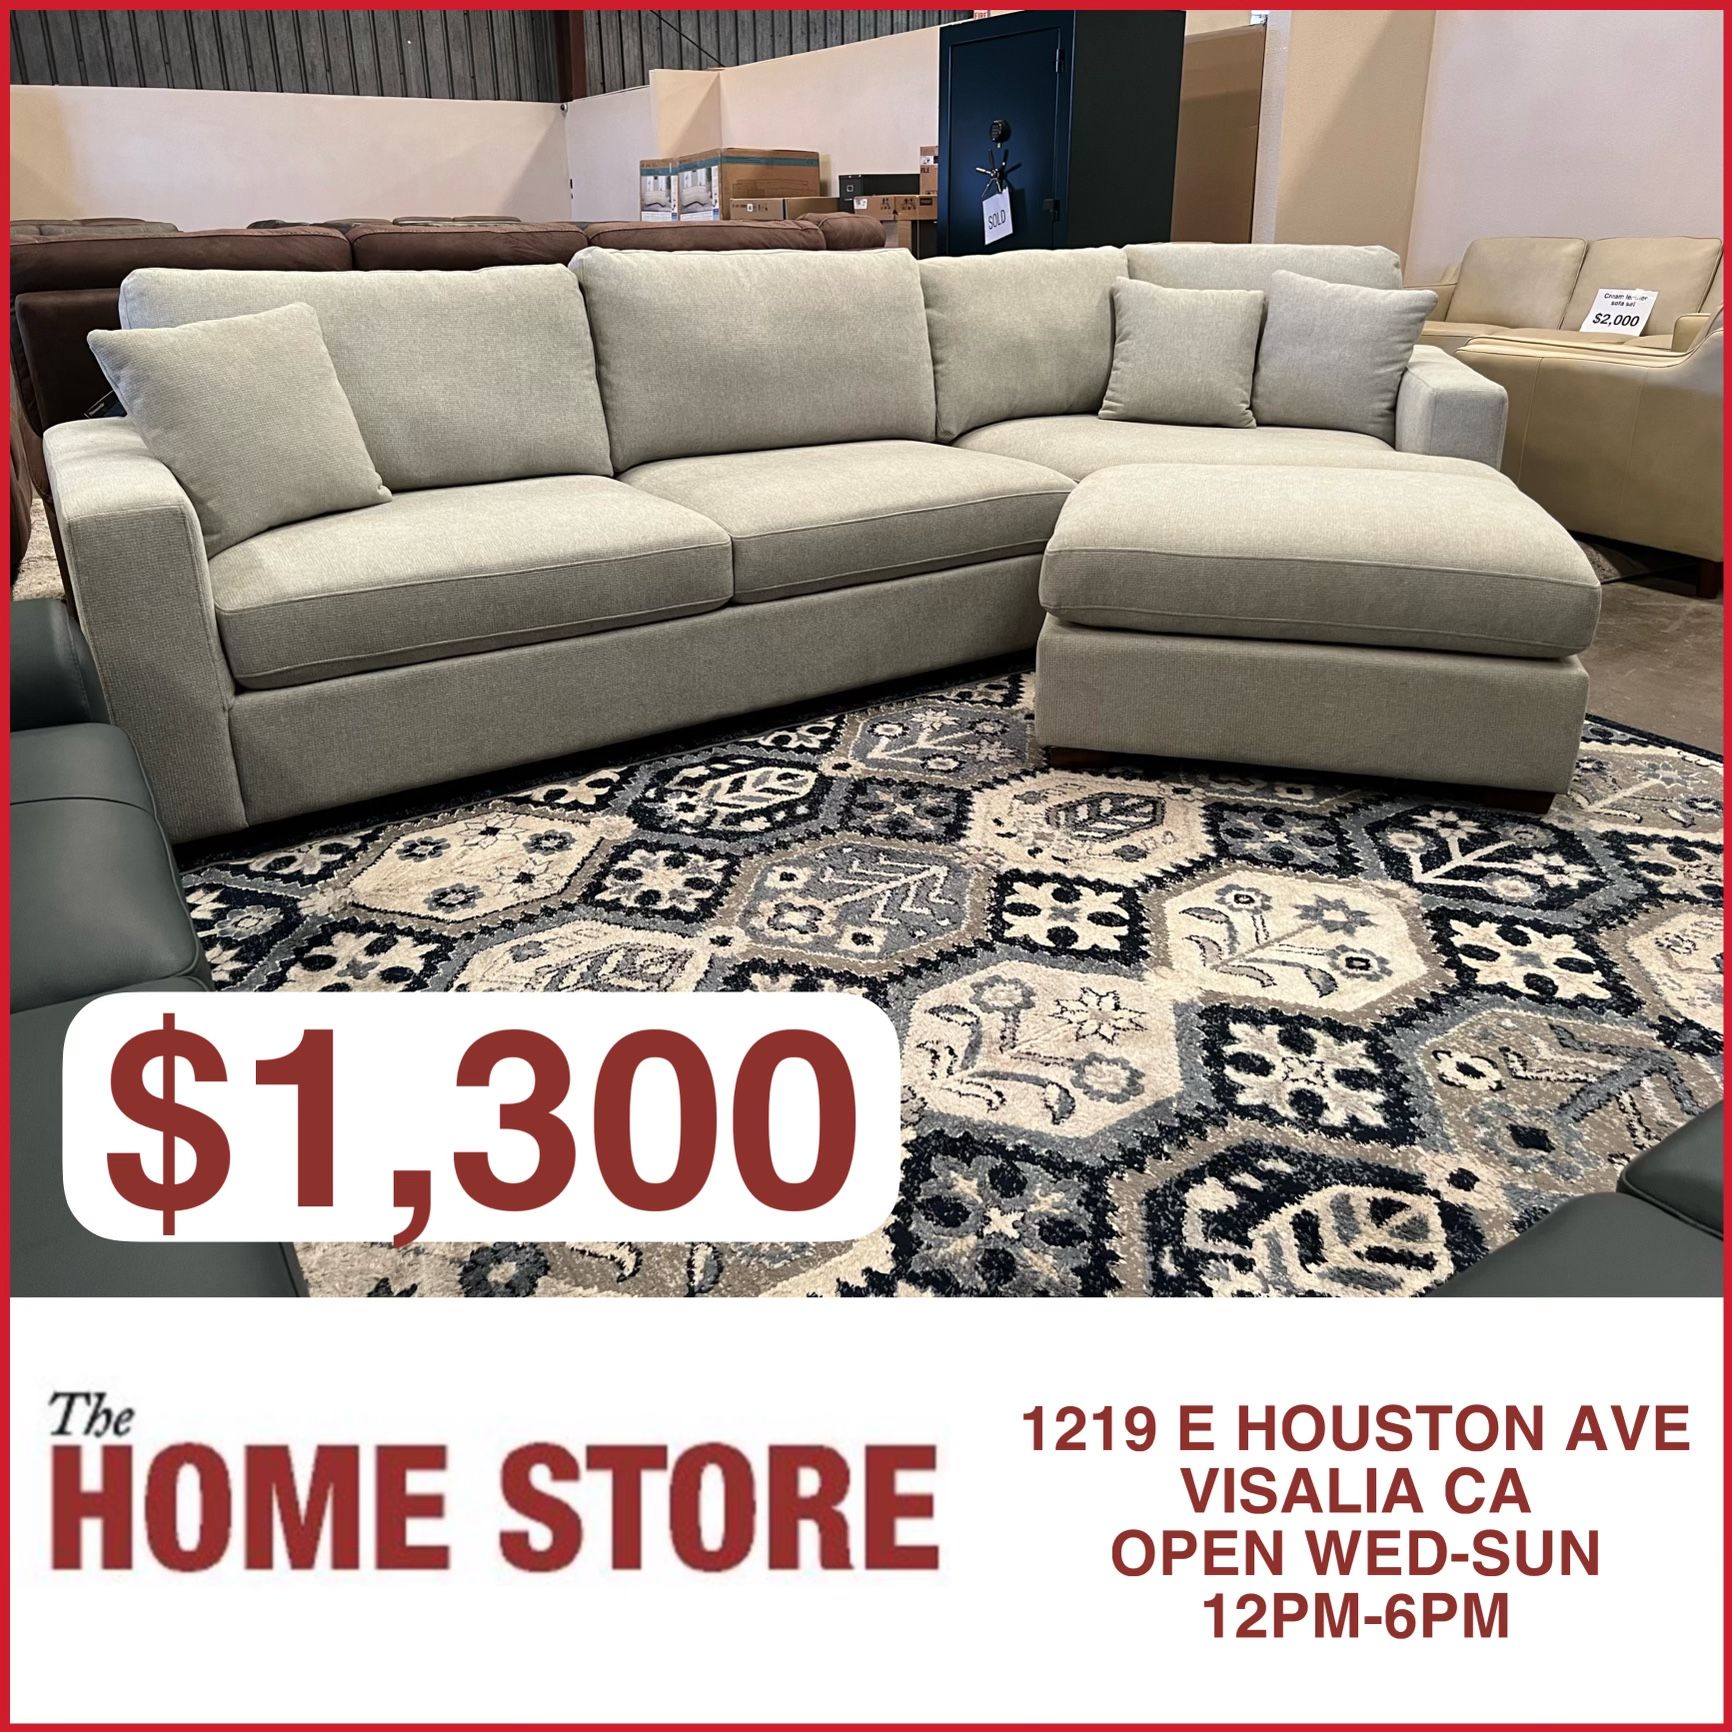 Gray Fabric Sectional With Ottman (Free Area Rug With Purchase)